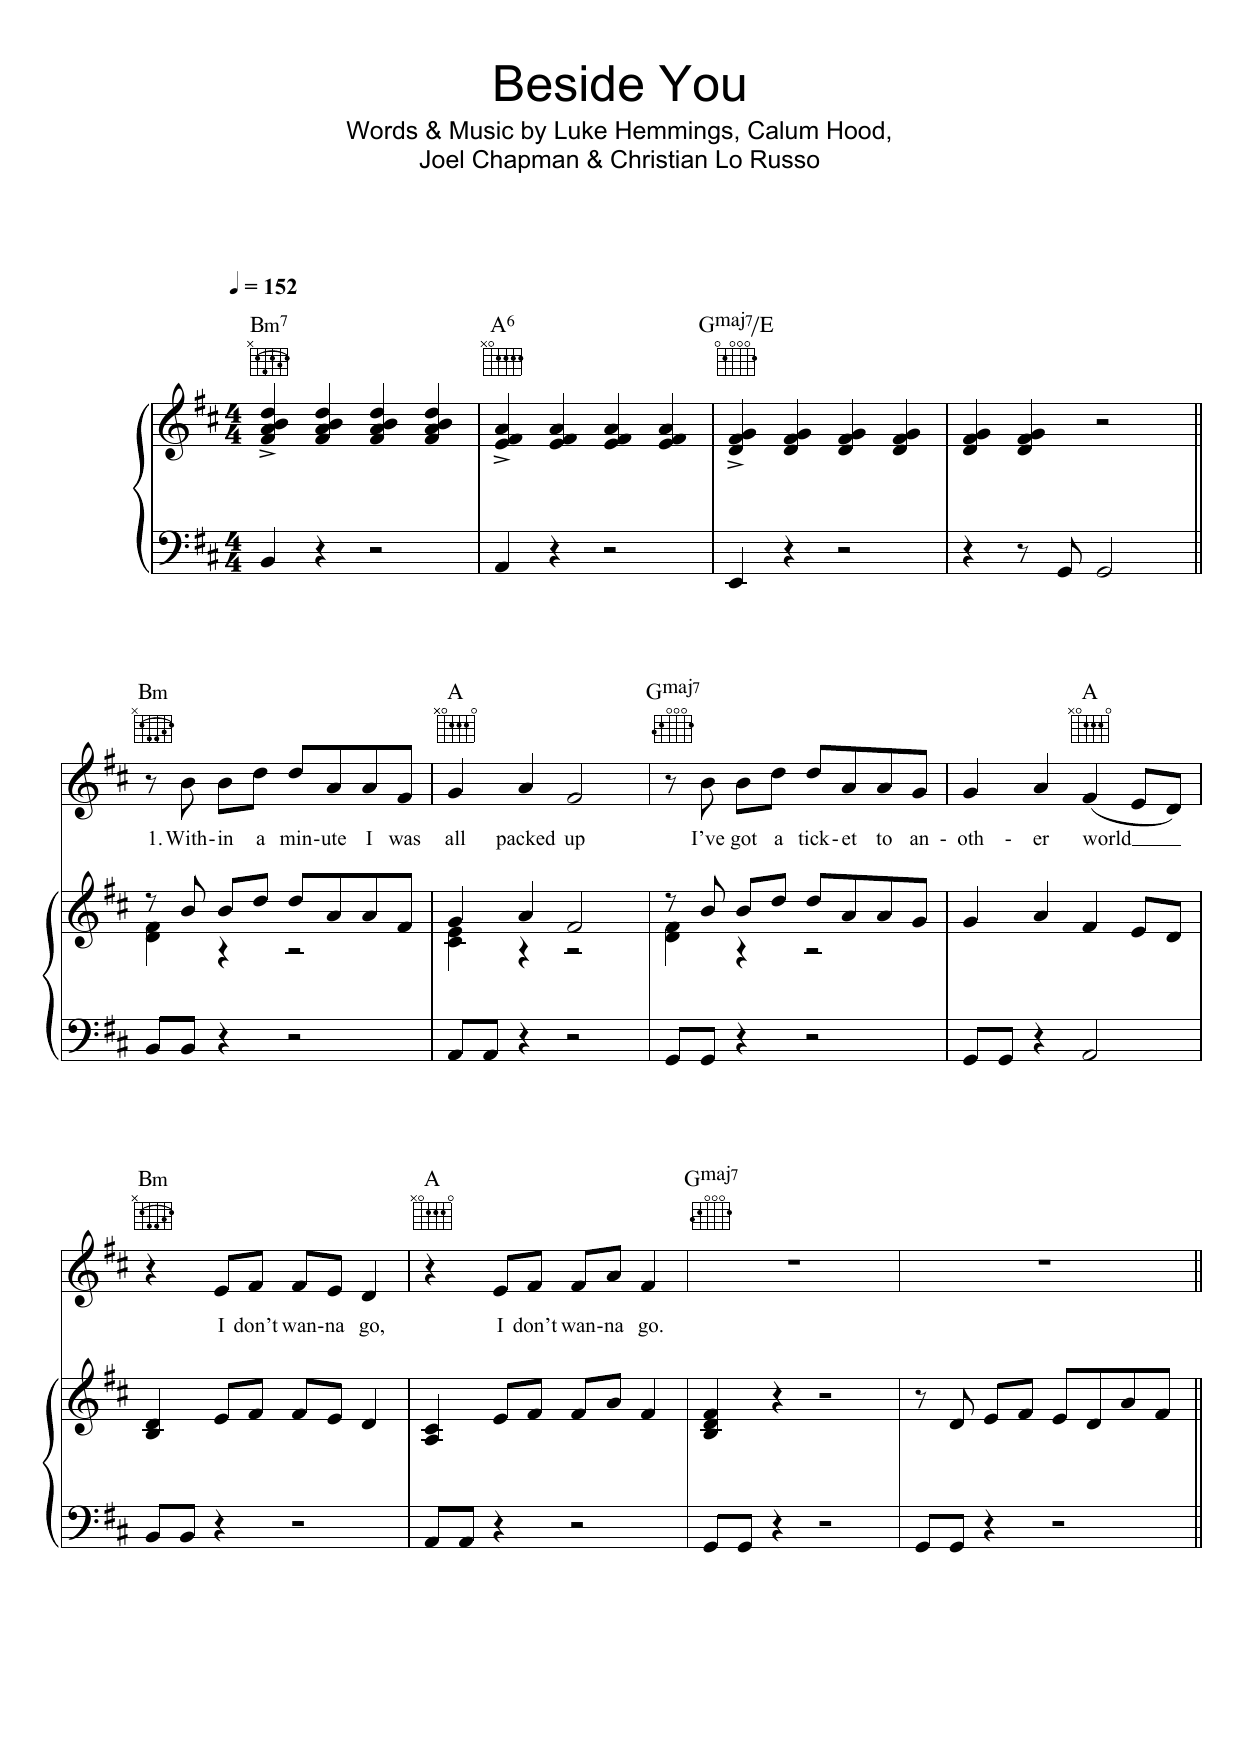 Download 5 Seconds of Summer Beside You Sheet Music